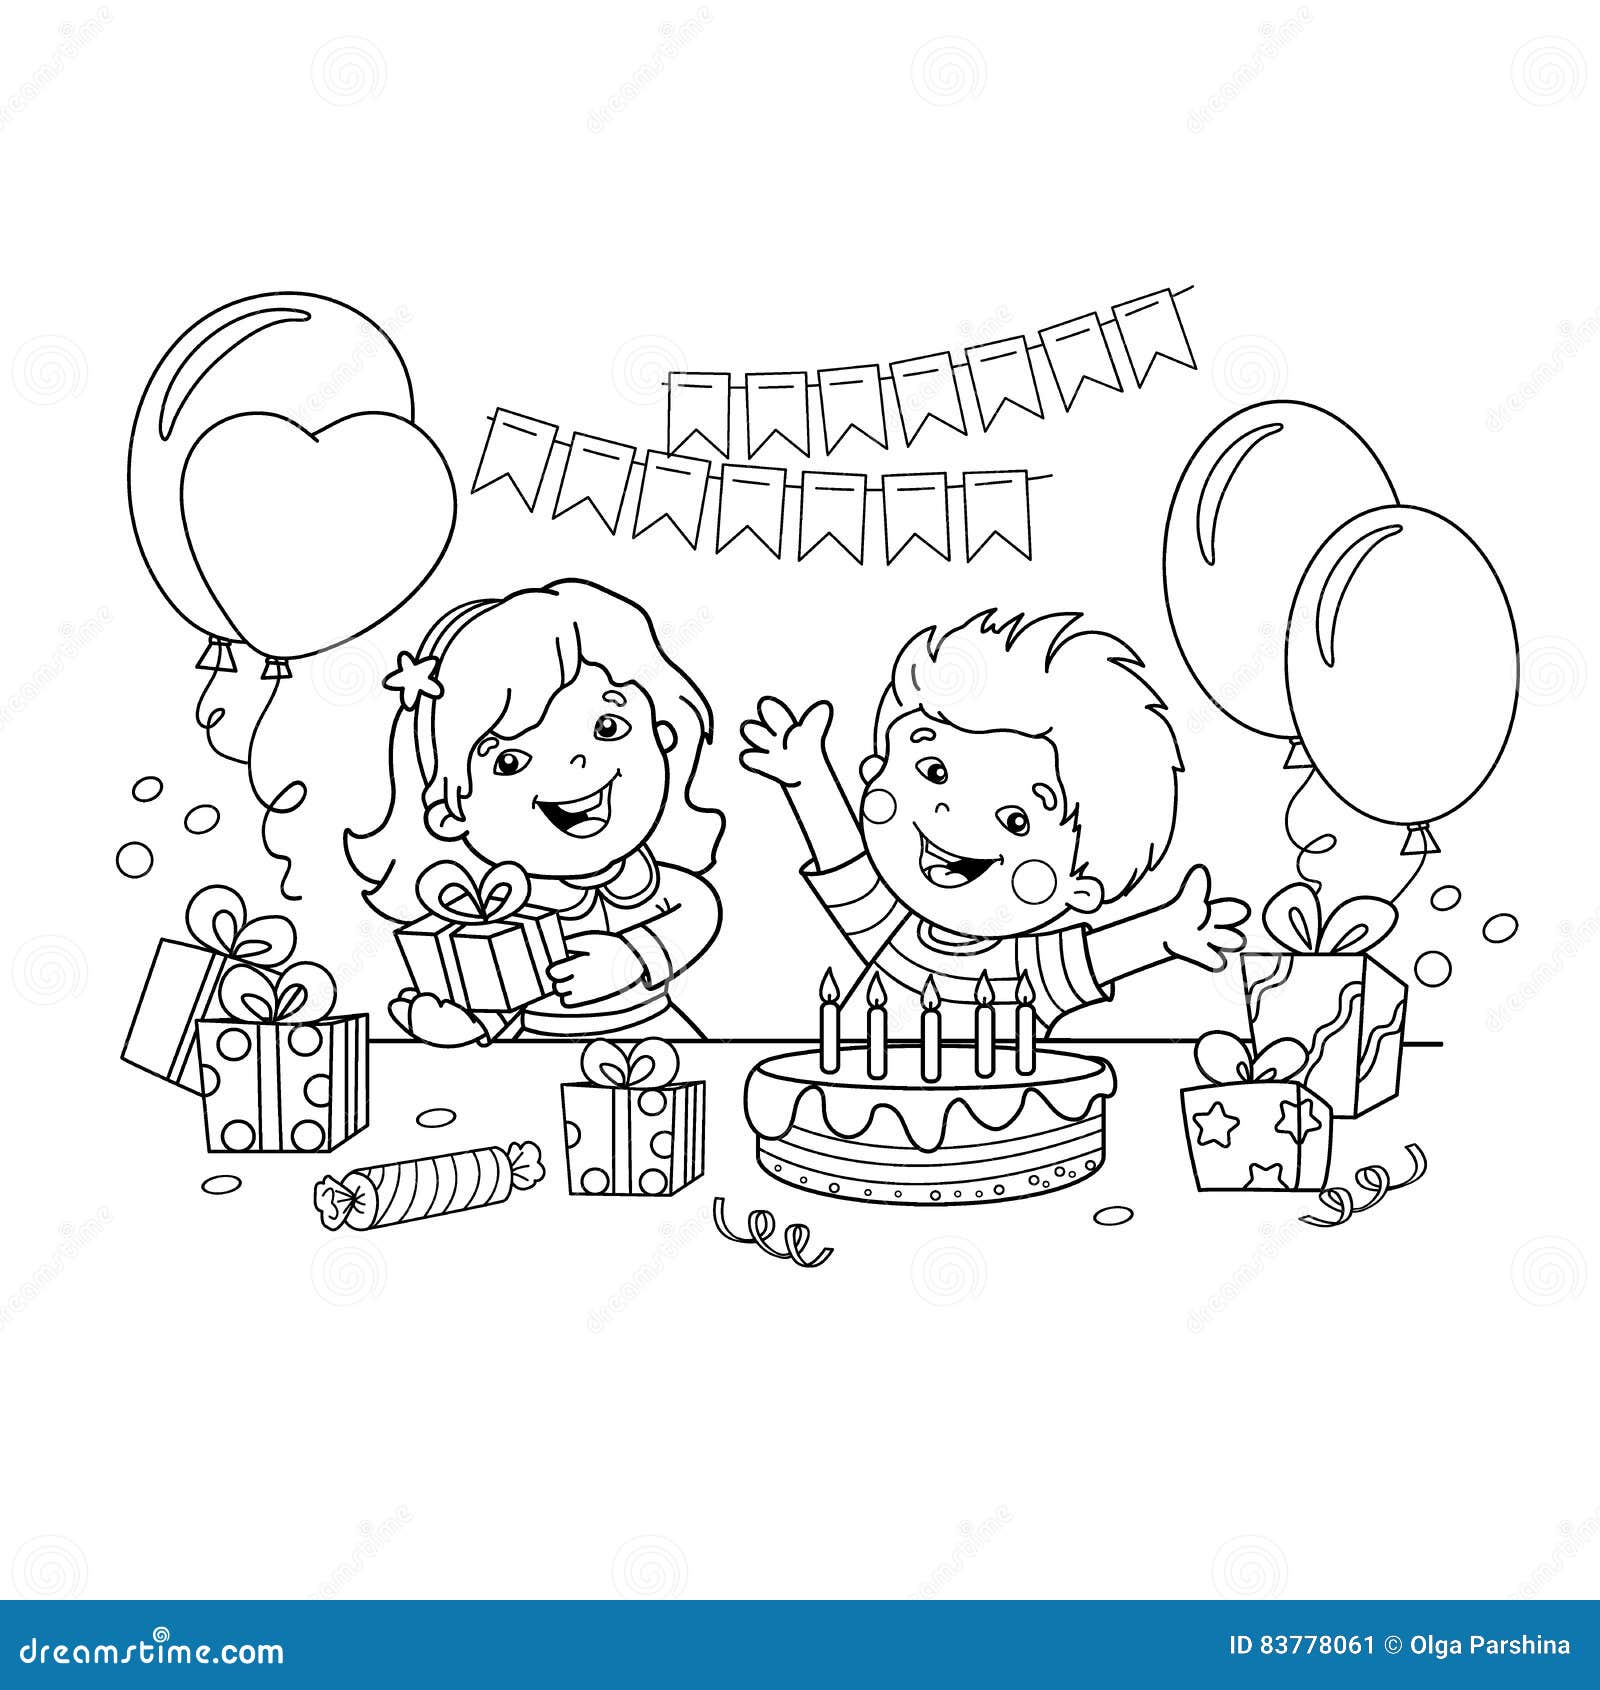 Coloring Page Outline Of Children With A Gifts At The Holiday. Birthday. Coloring Book For Kids 